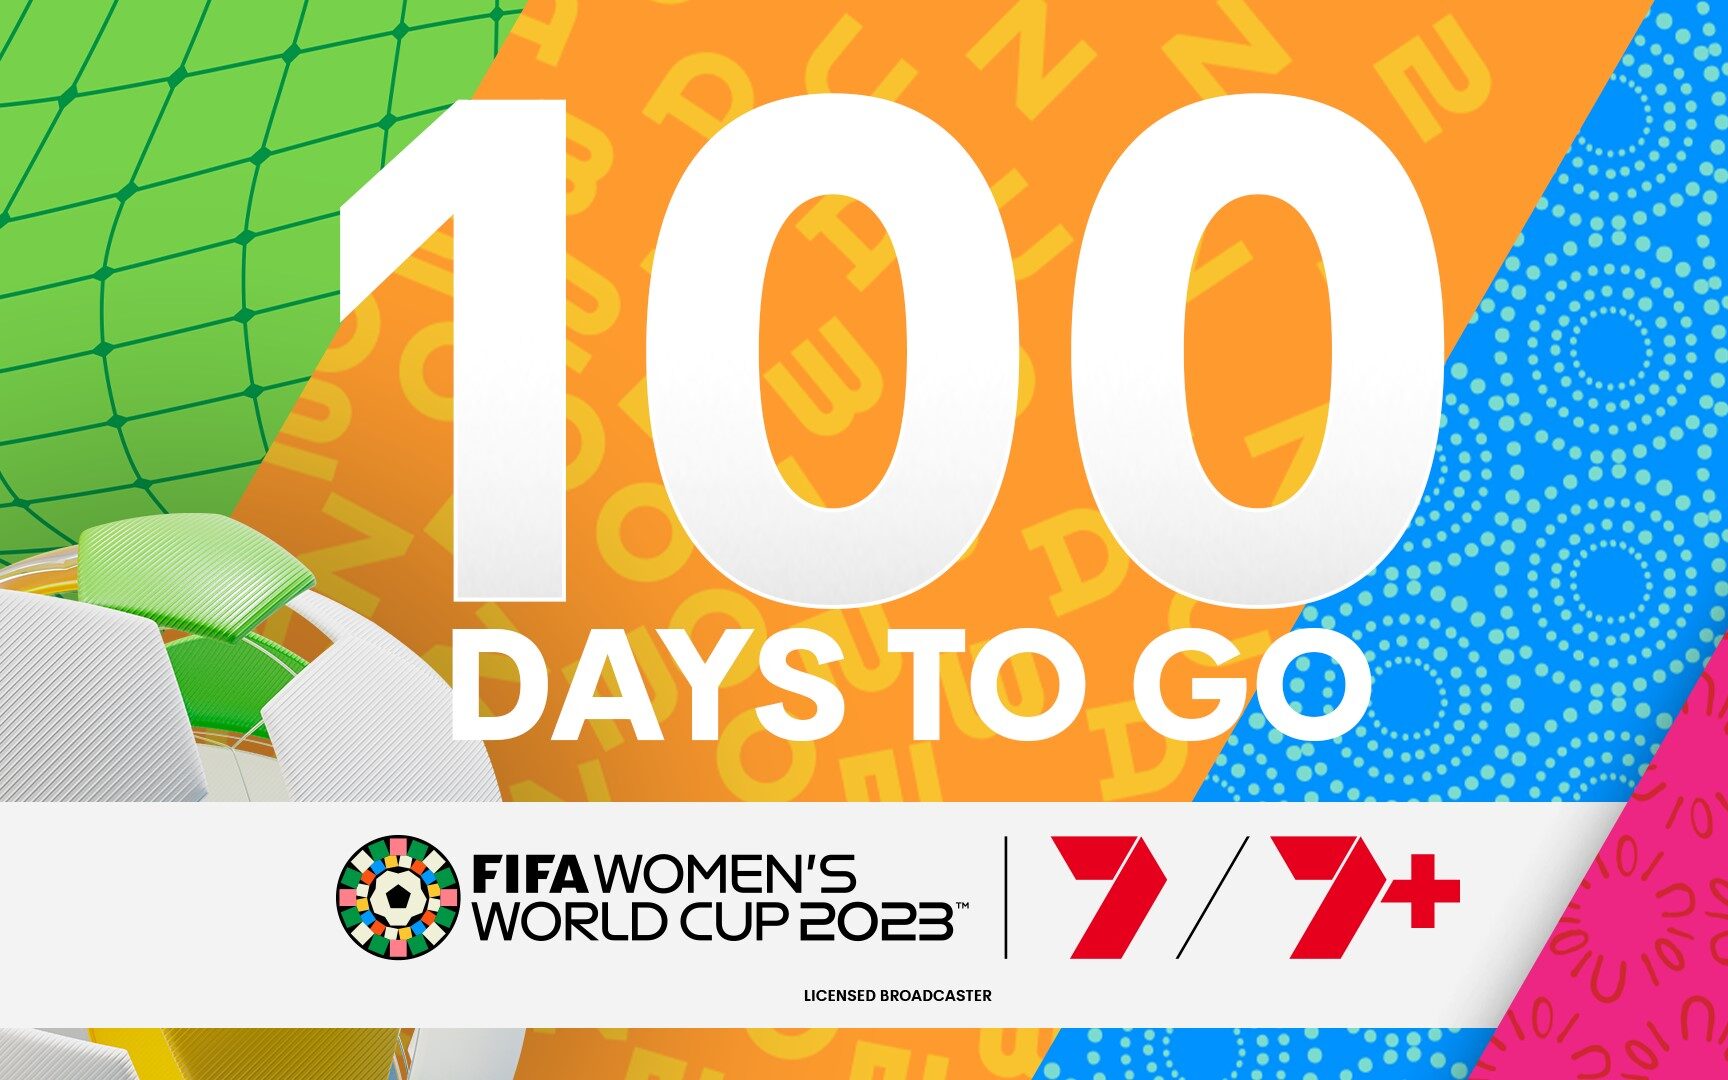 FIFA Women’s World Cup 2023 on Channel 7 has 100 days to go TV Central